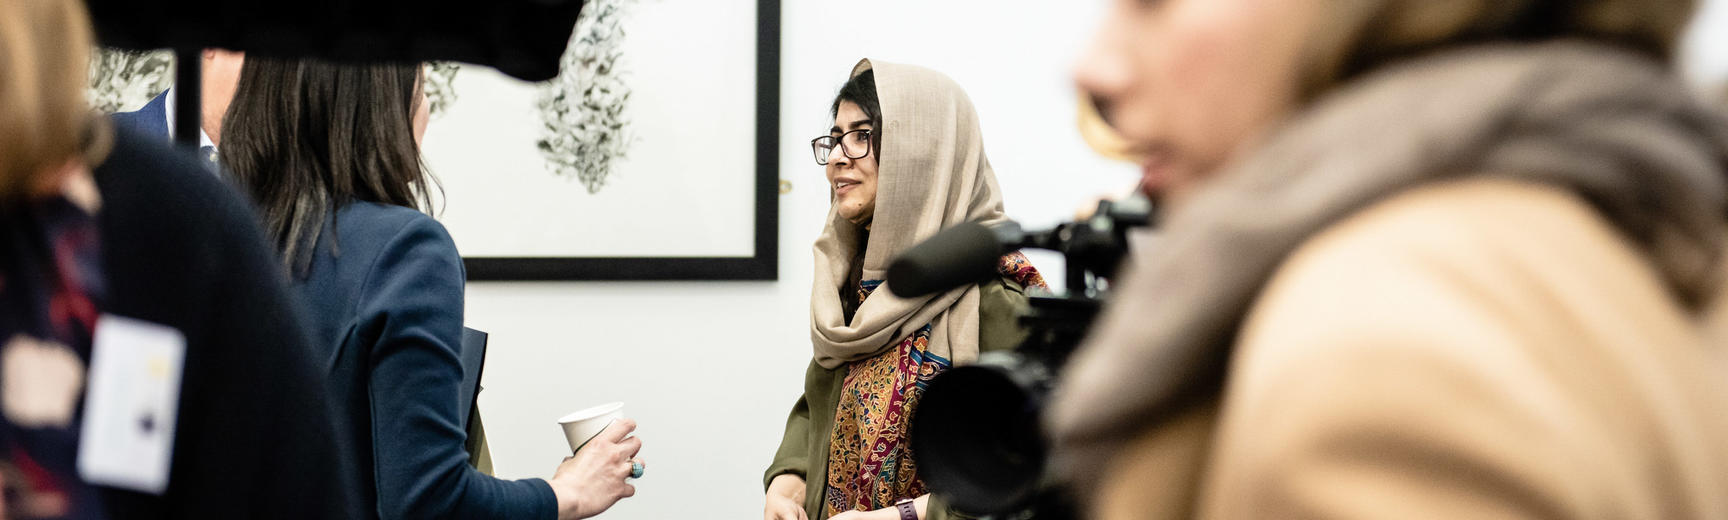 Malala Yousafzai speaks with a young woman in the background, in the foreground media equipment